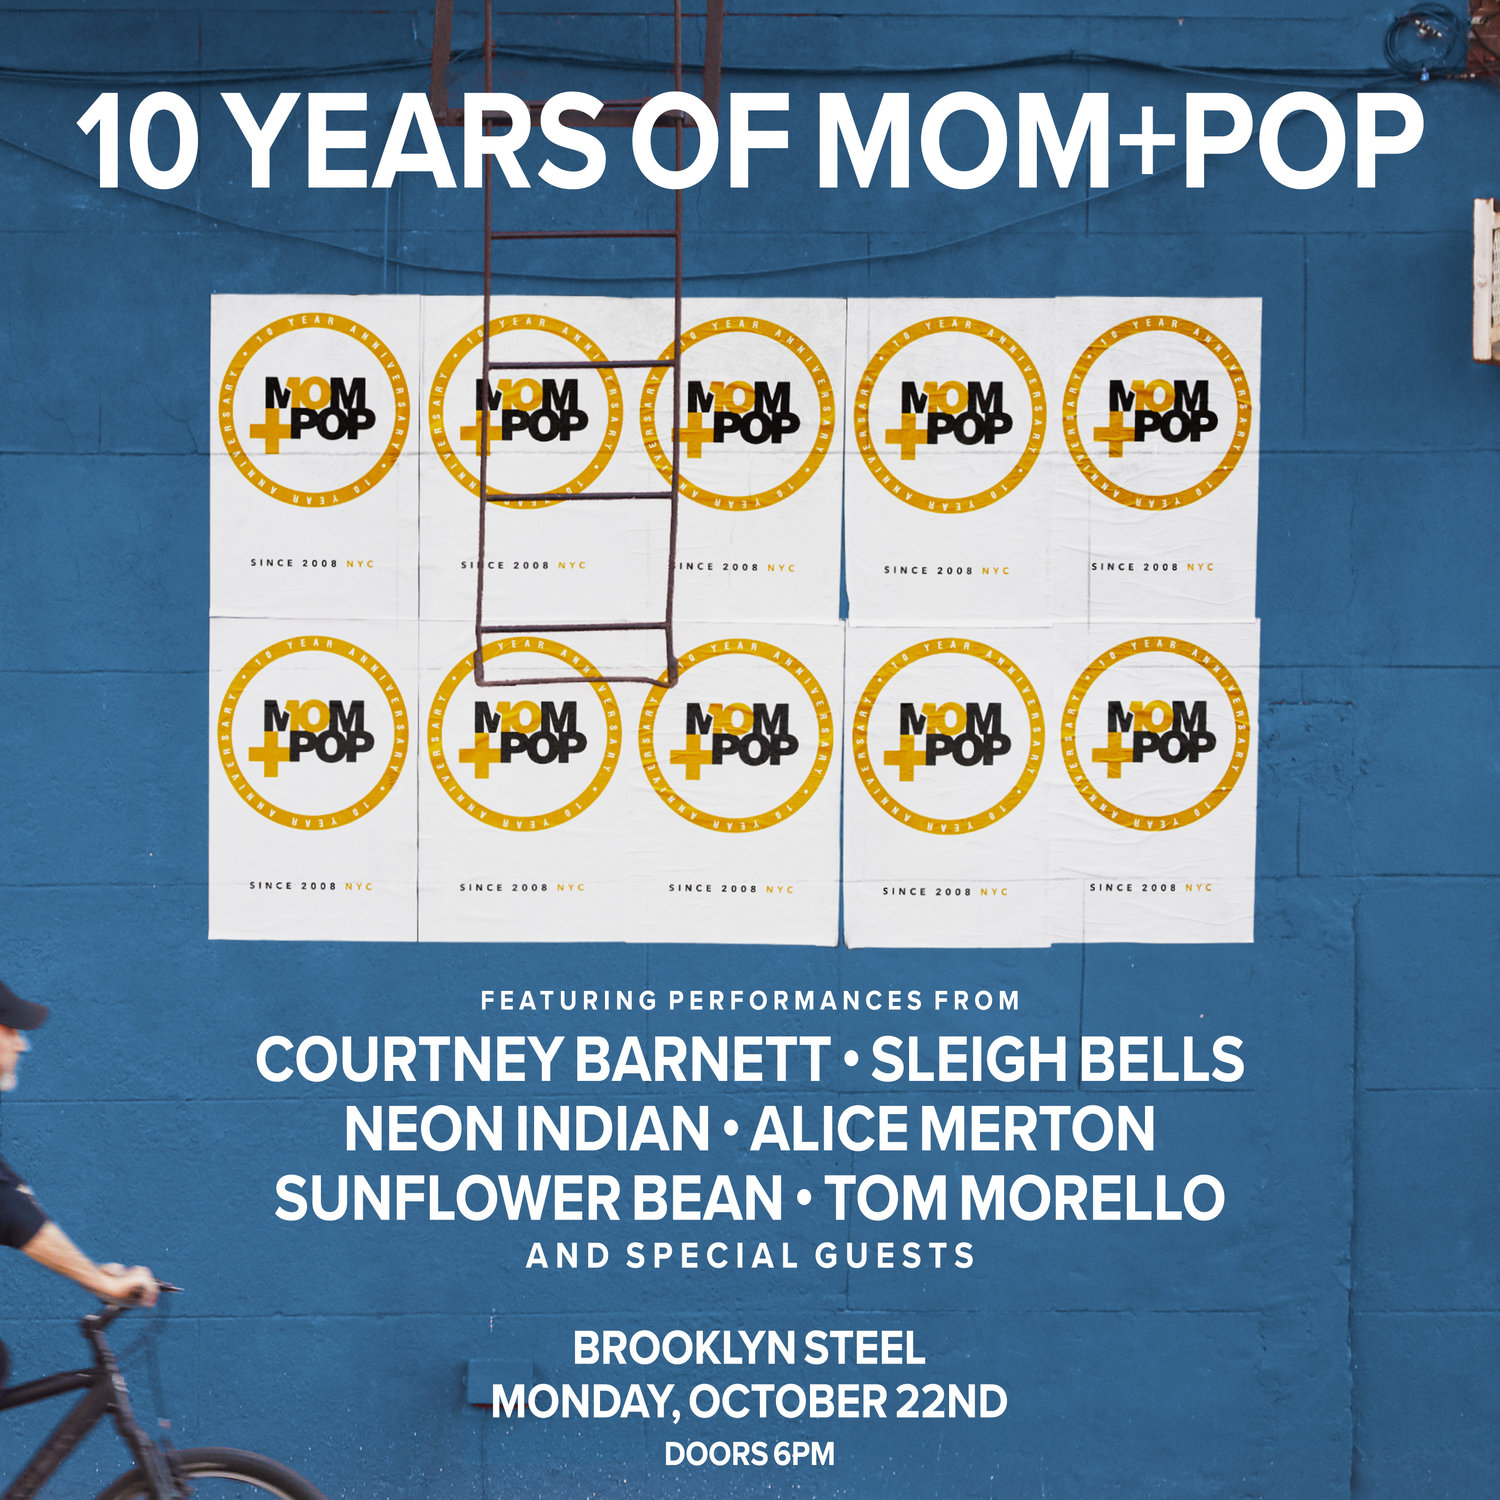 Tom Morello, Courtney Barnett and More to Play ’10 Years of Mom + Pop’ Celebration